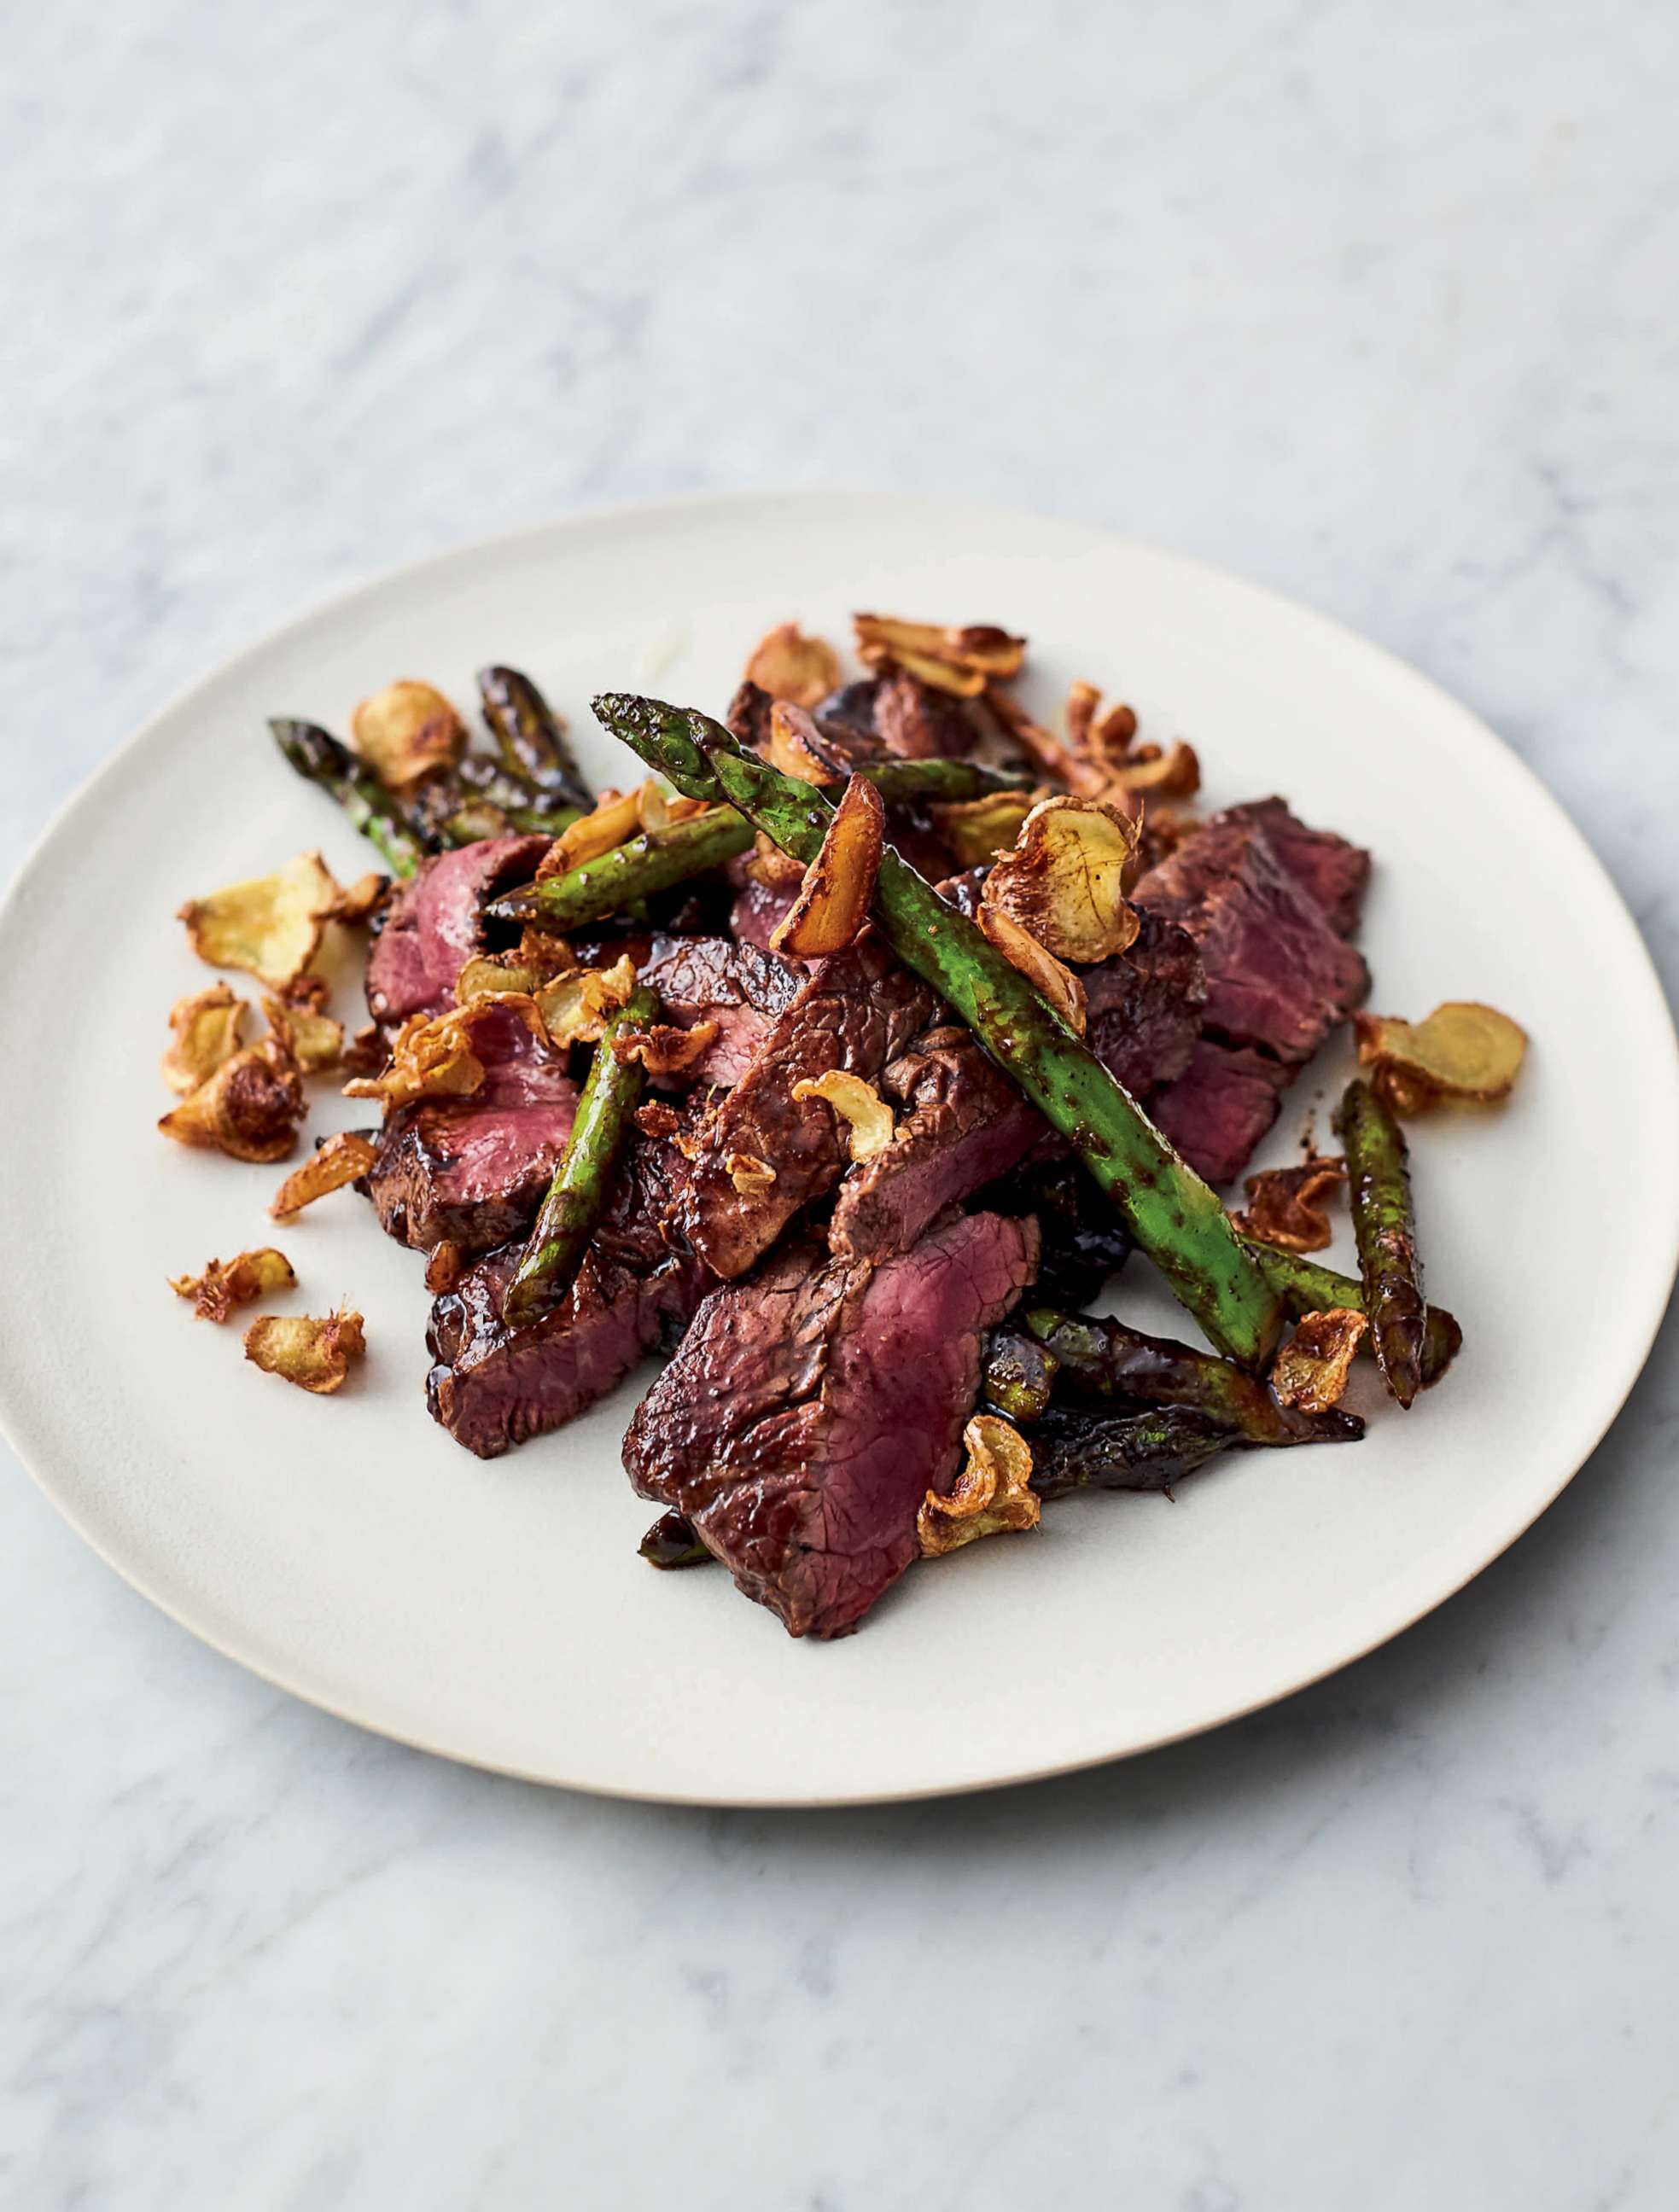 PHOTO: Jamie Oliver's quick steak stir-fry from his new cookbook "5 Ingredients Quick & Easy Food."